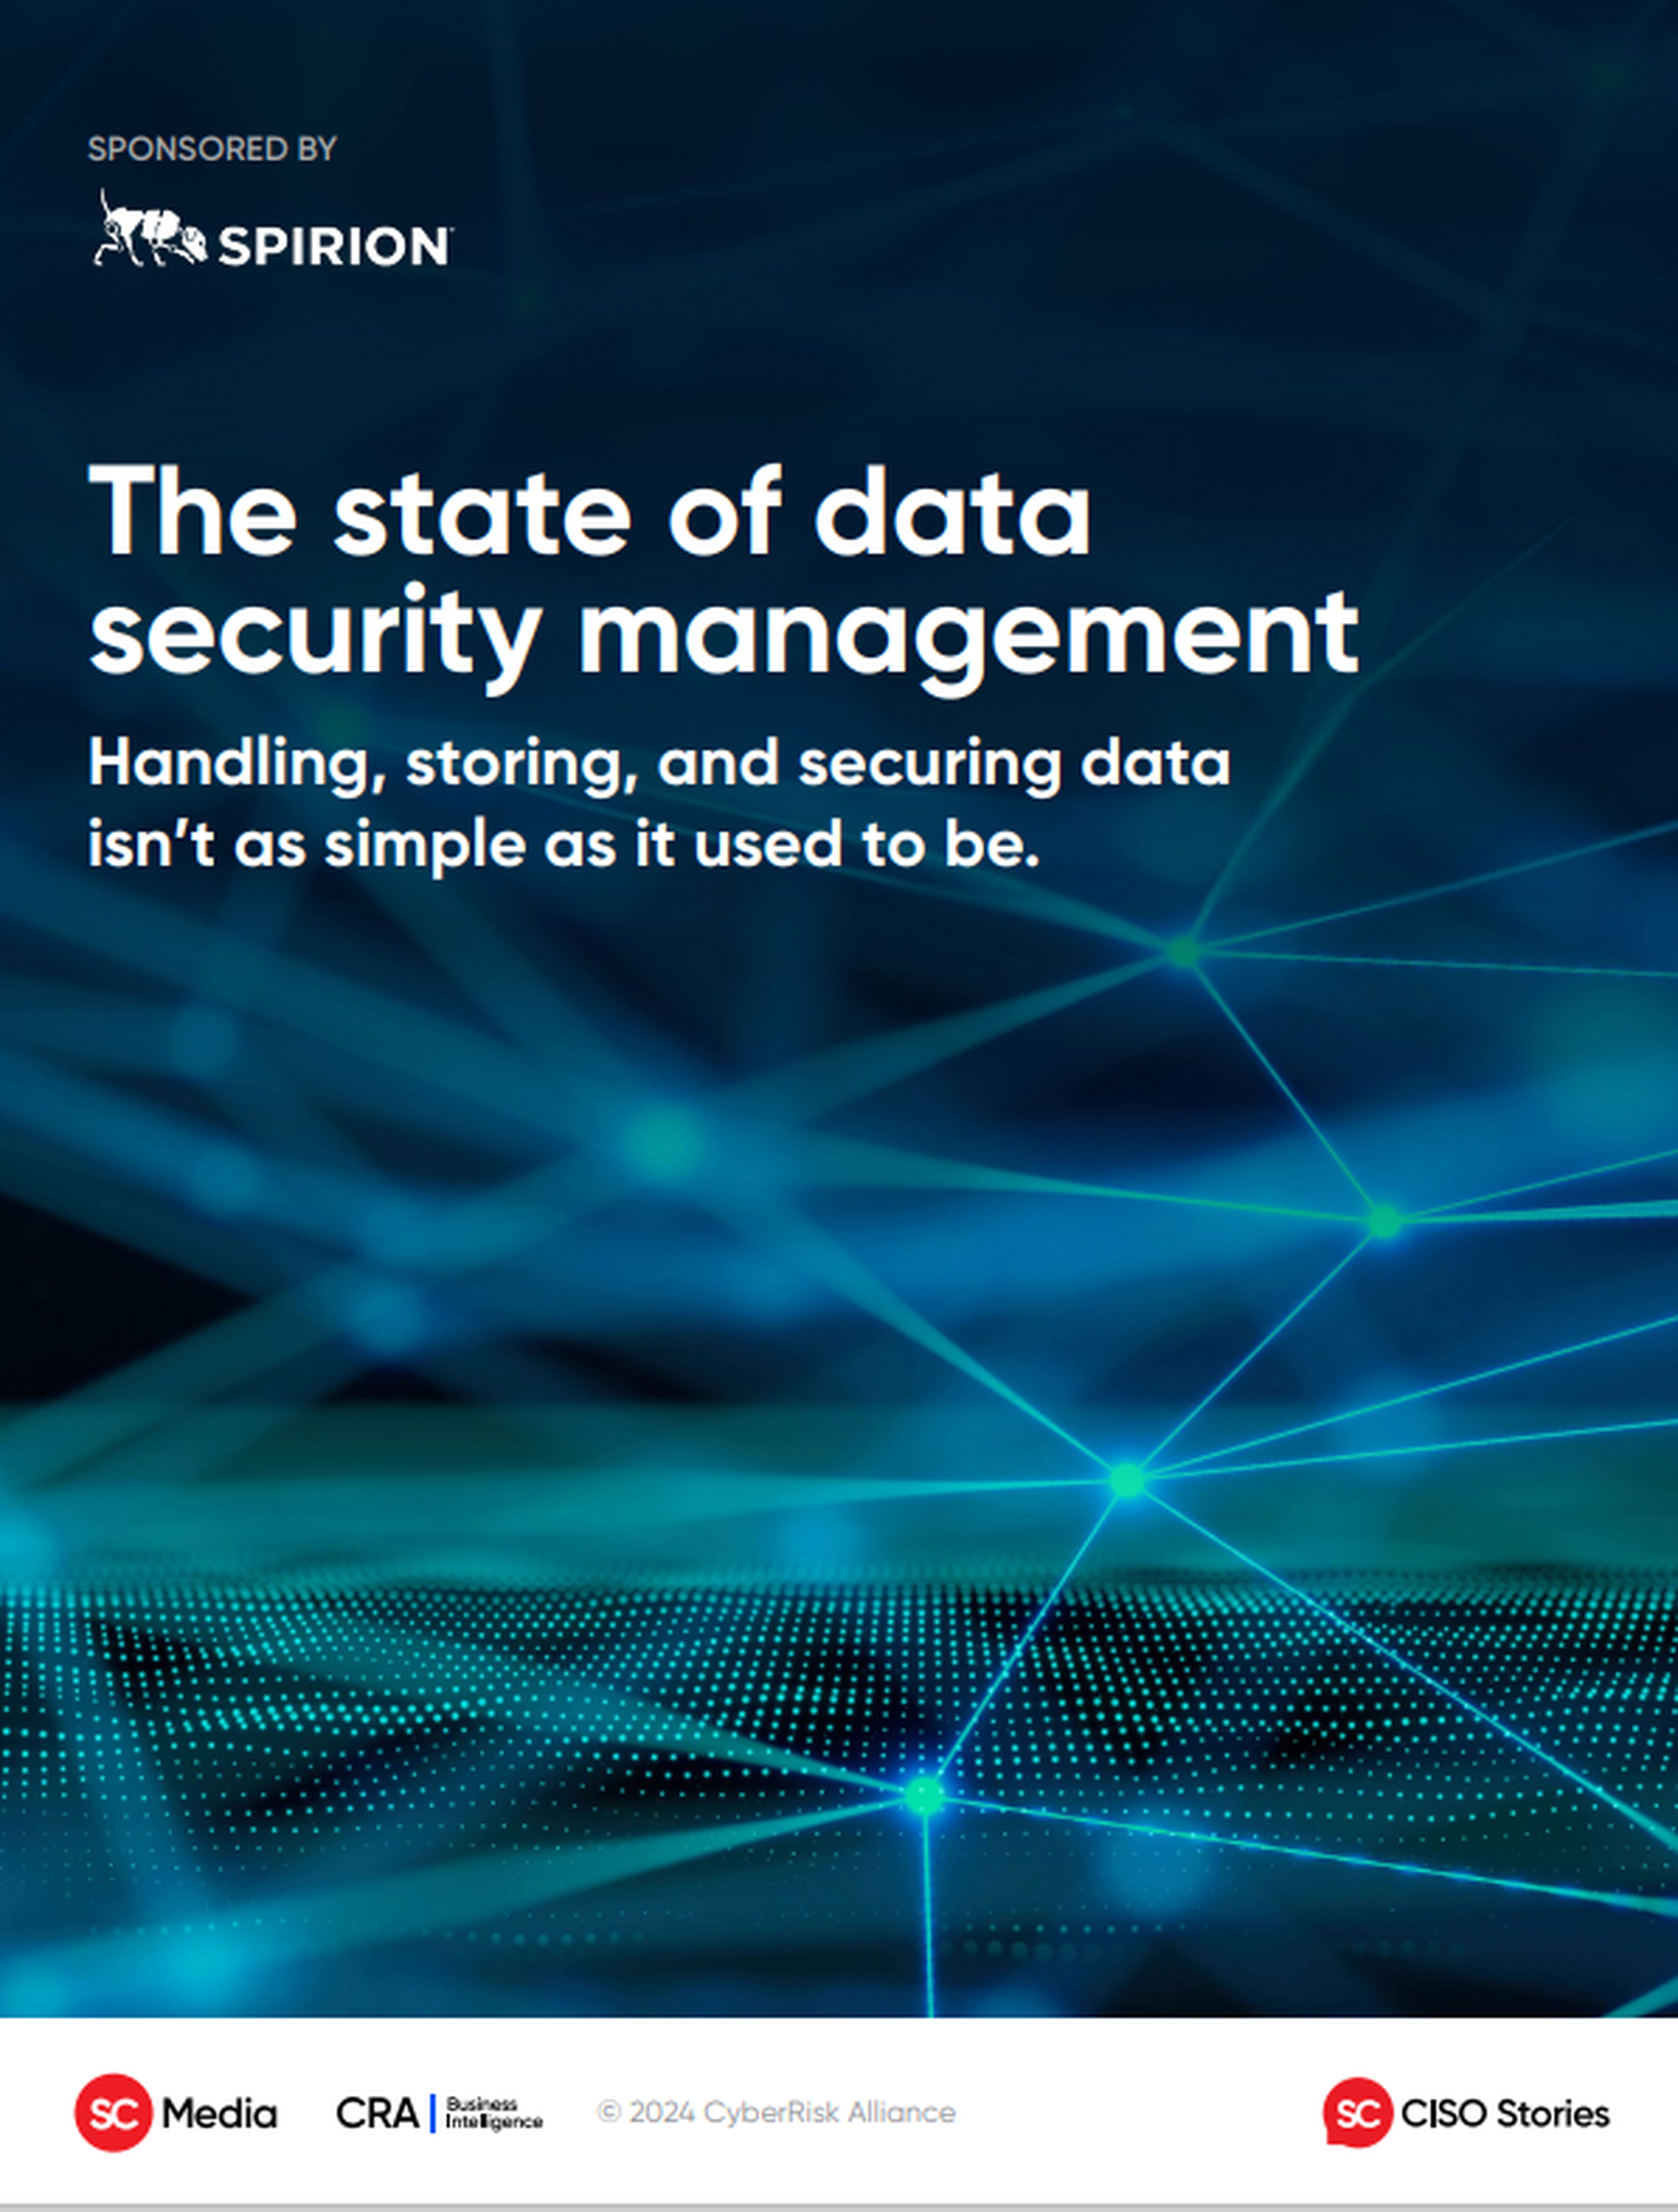 The state of data security management